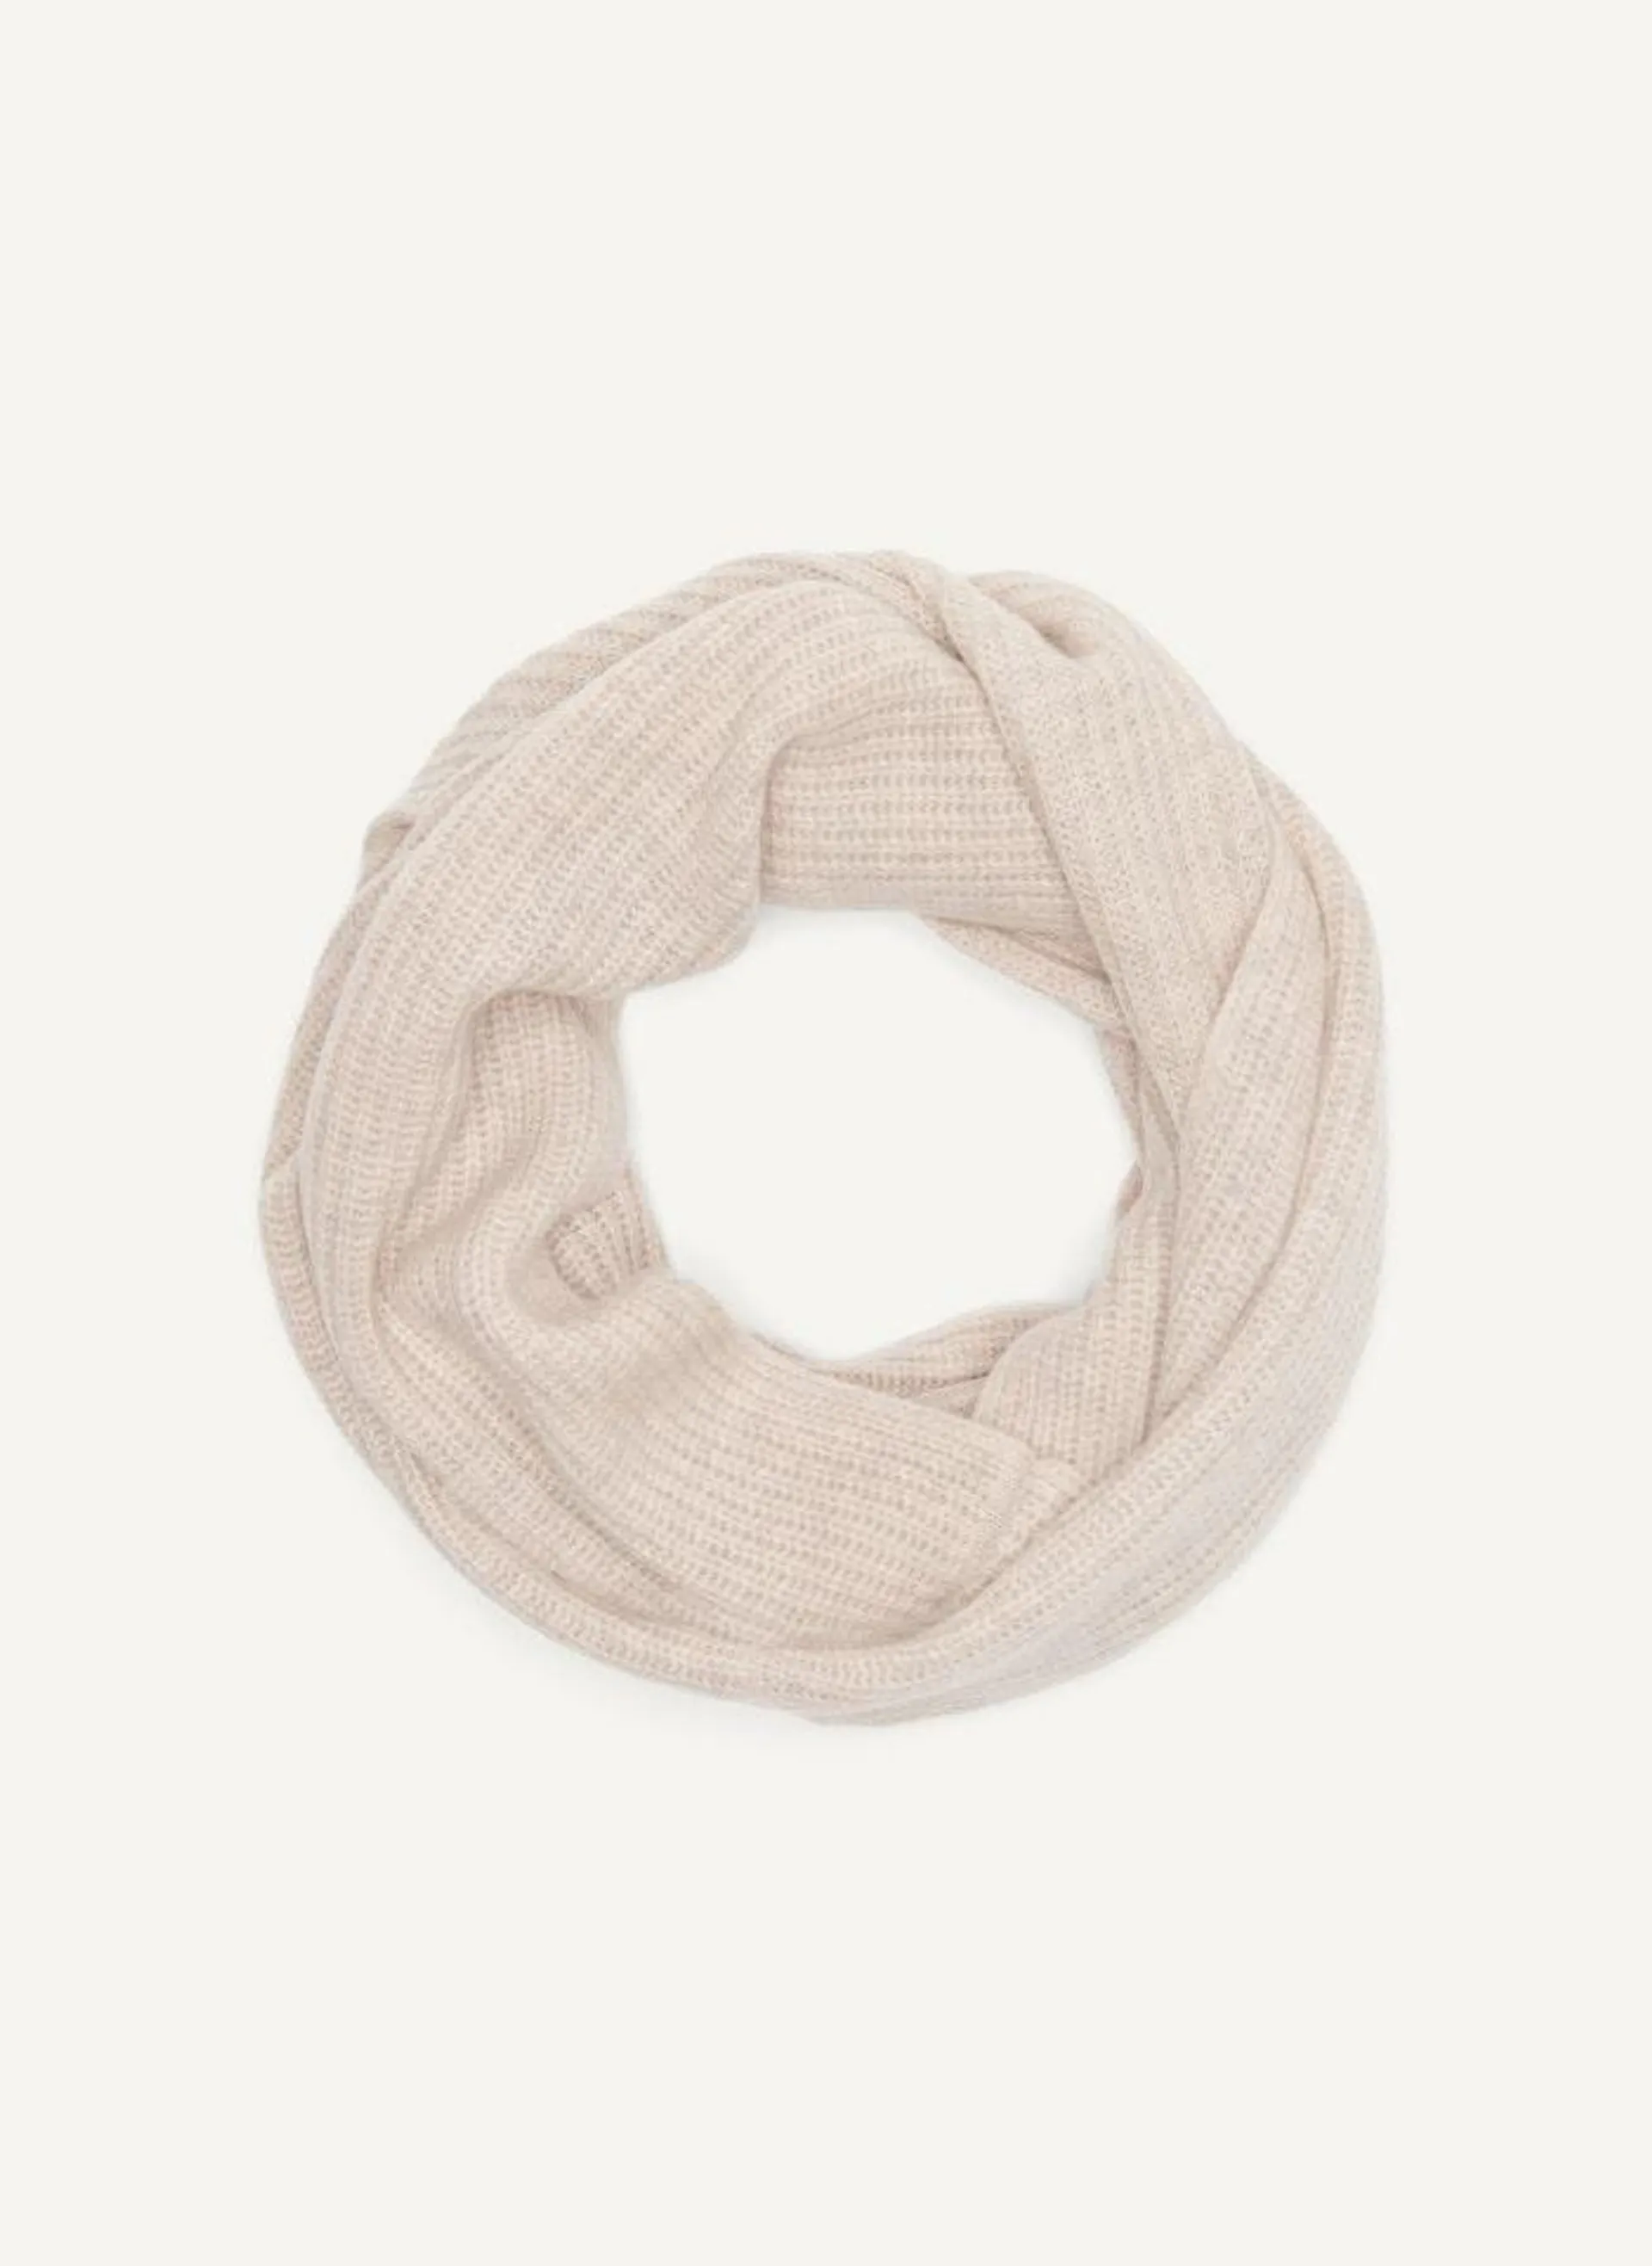 DKNY Pure Wool Cashmere Infinity Scarf